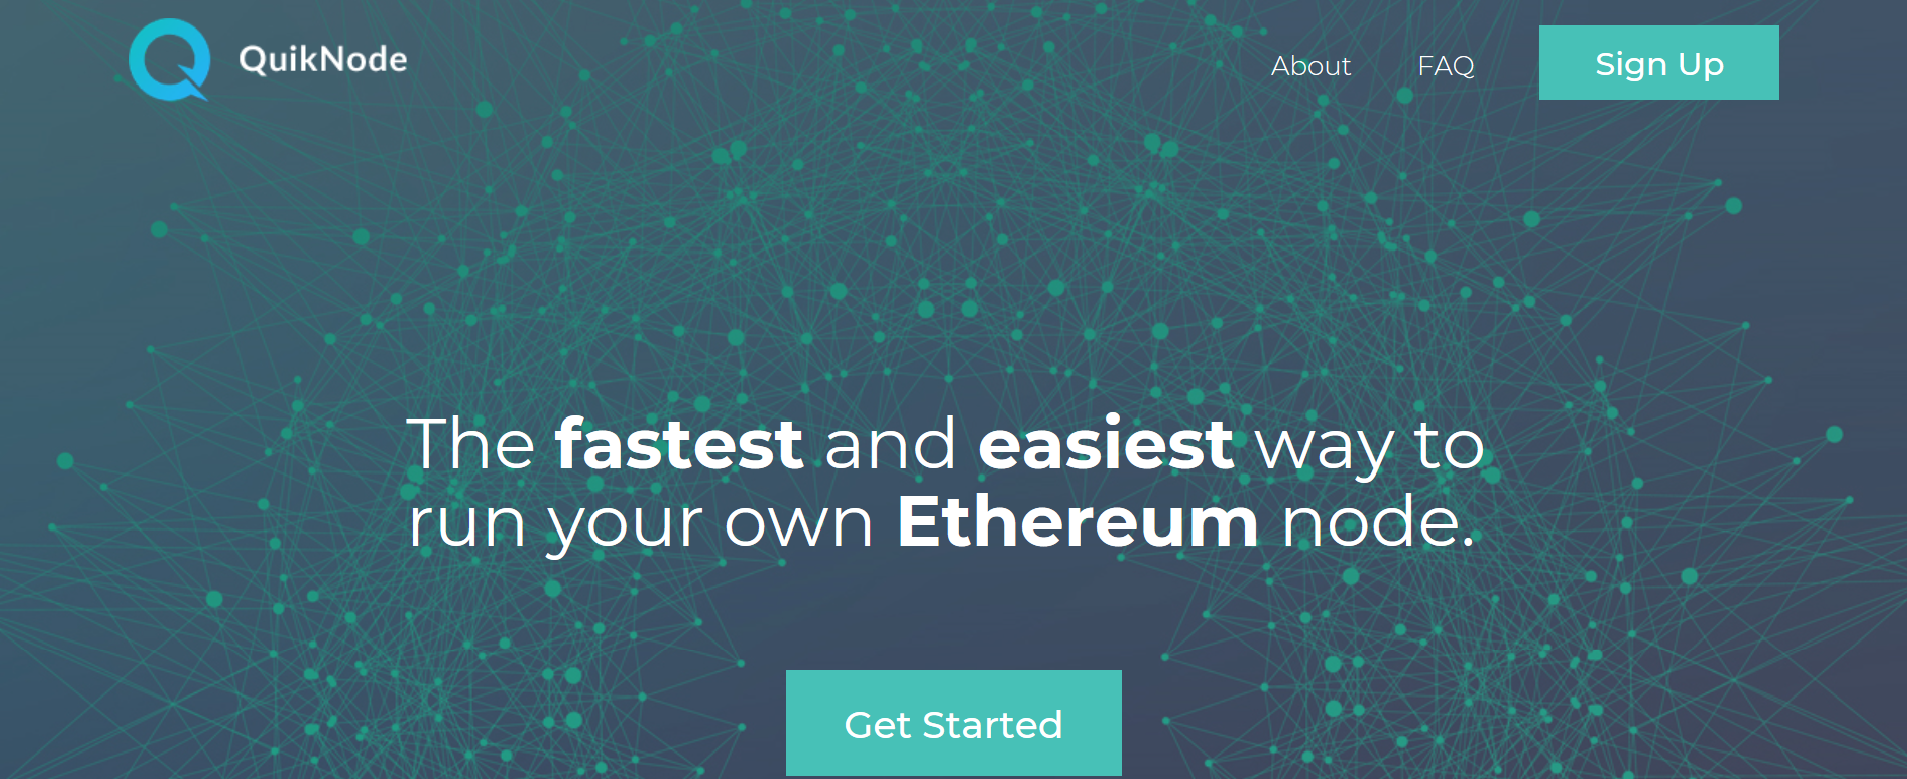 run your own ethereum network